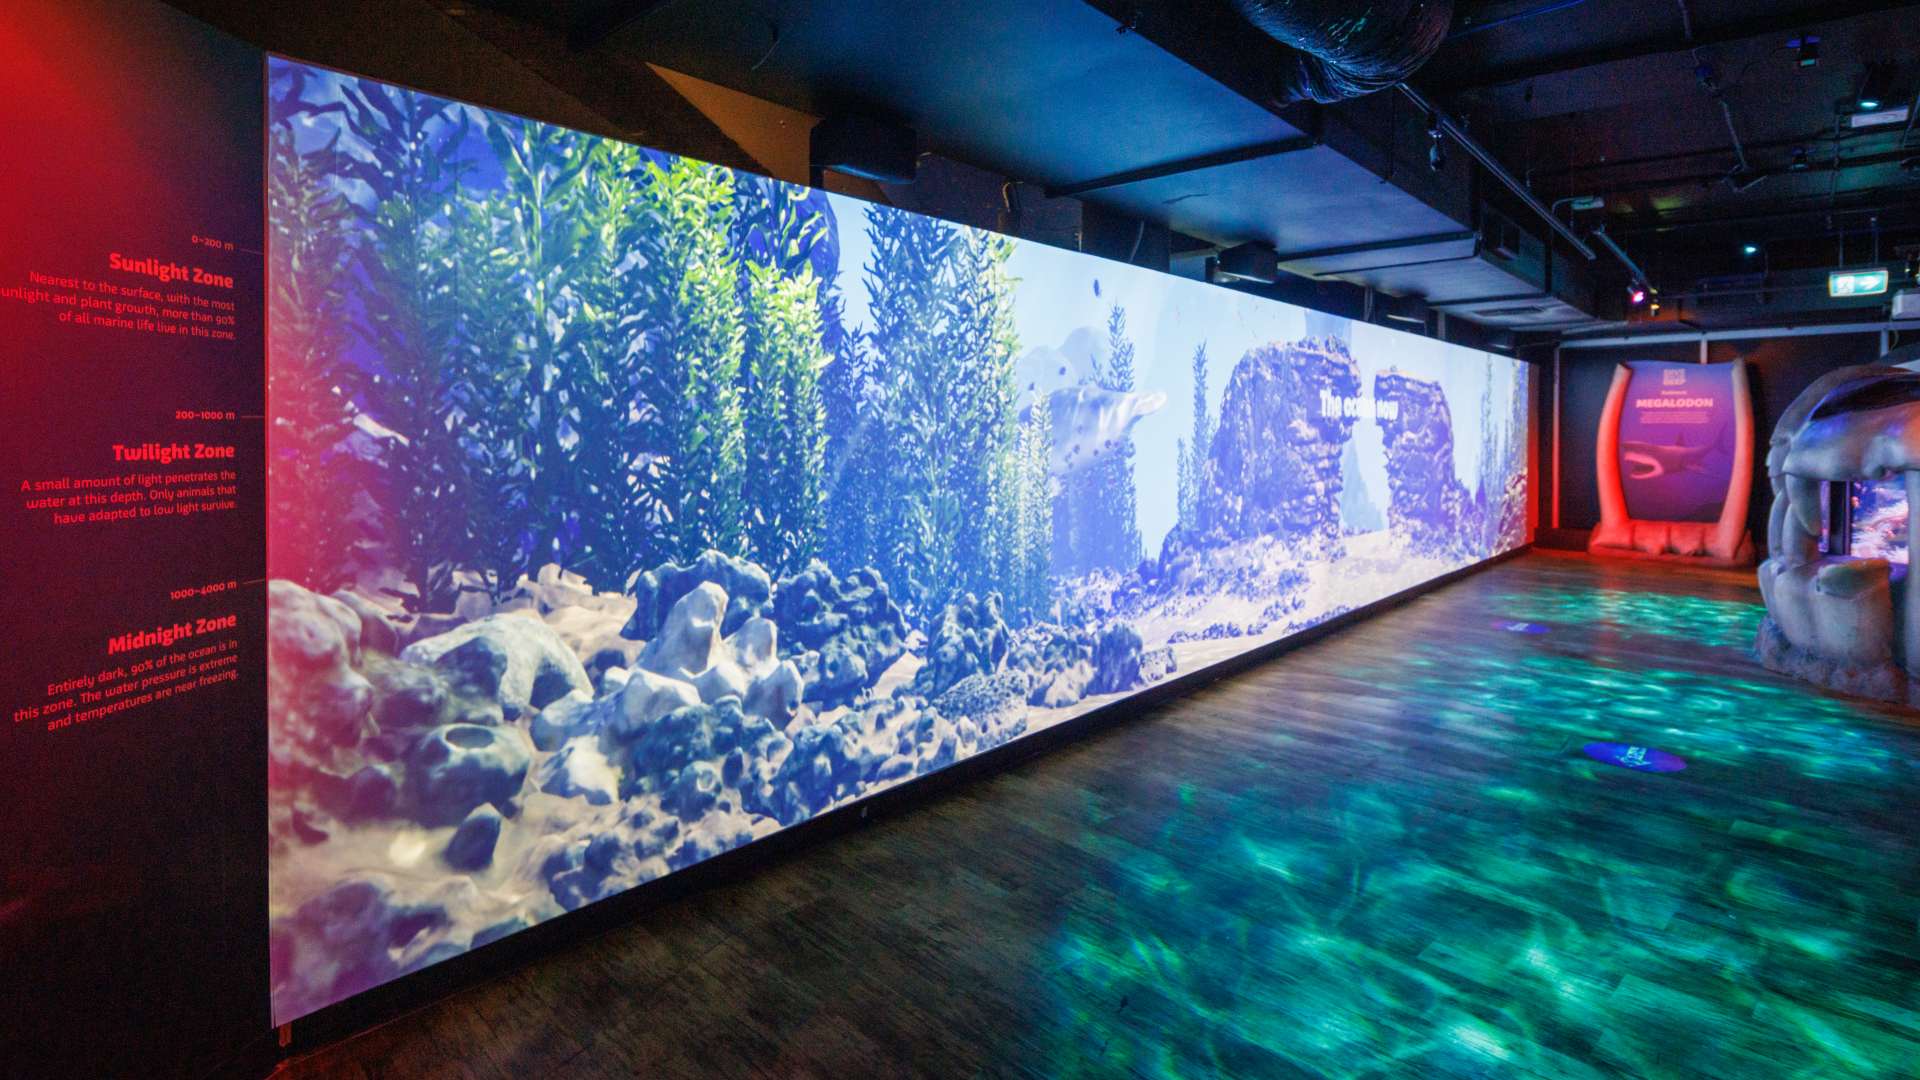 Melbourne Aquarium's New Giant Digital Exhibition Will Take You Deep Below the Ocean's Surface